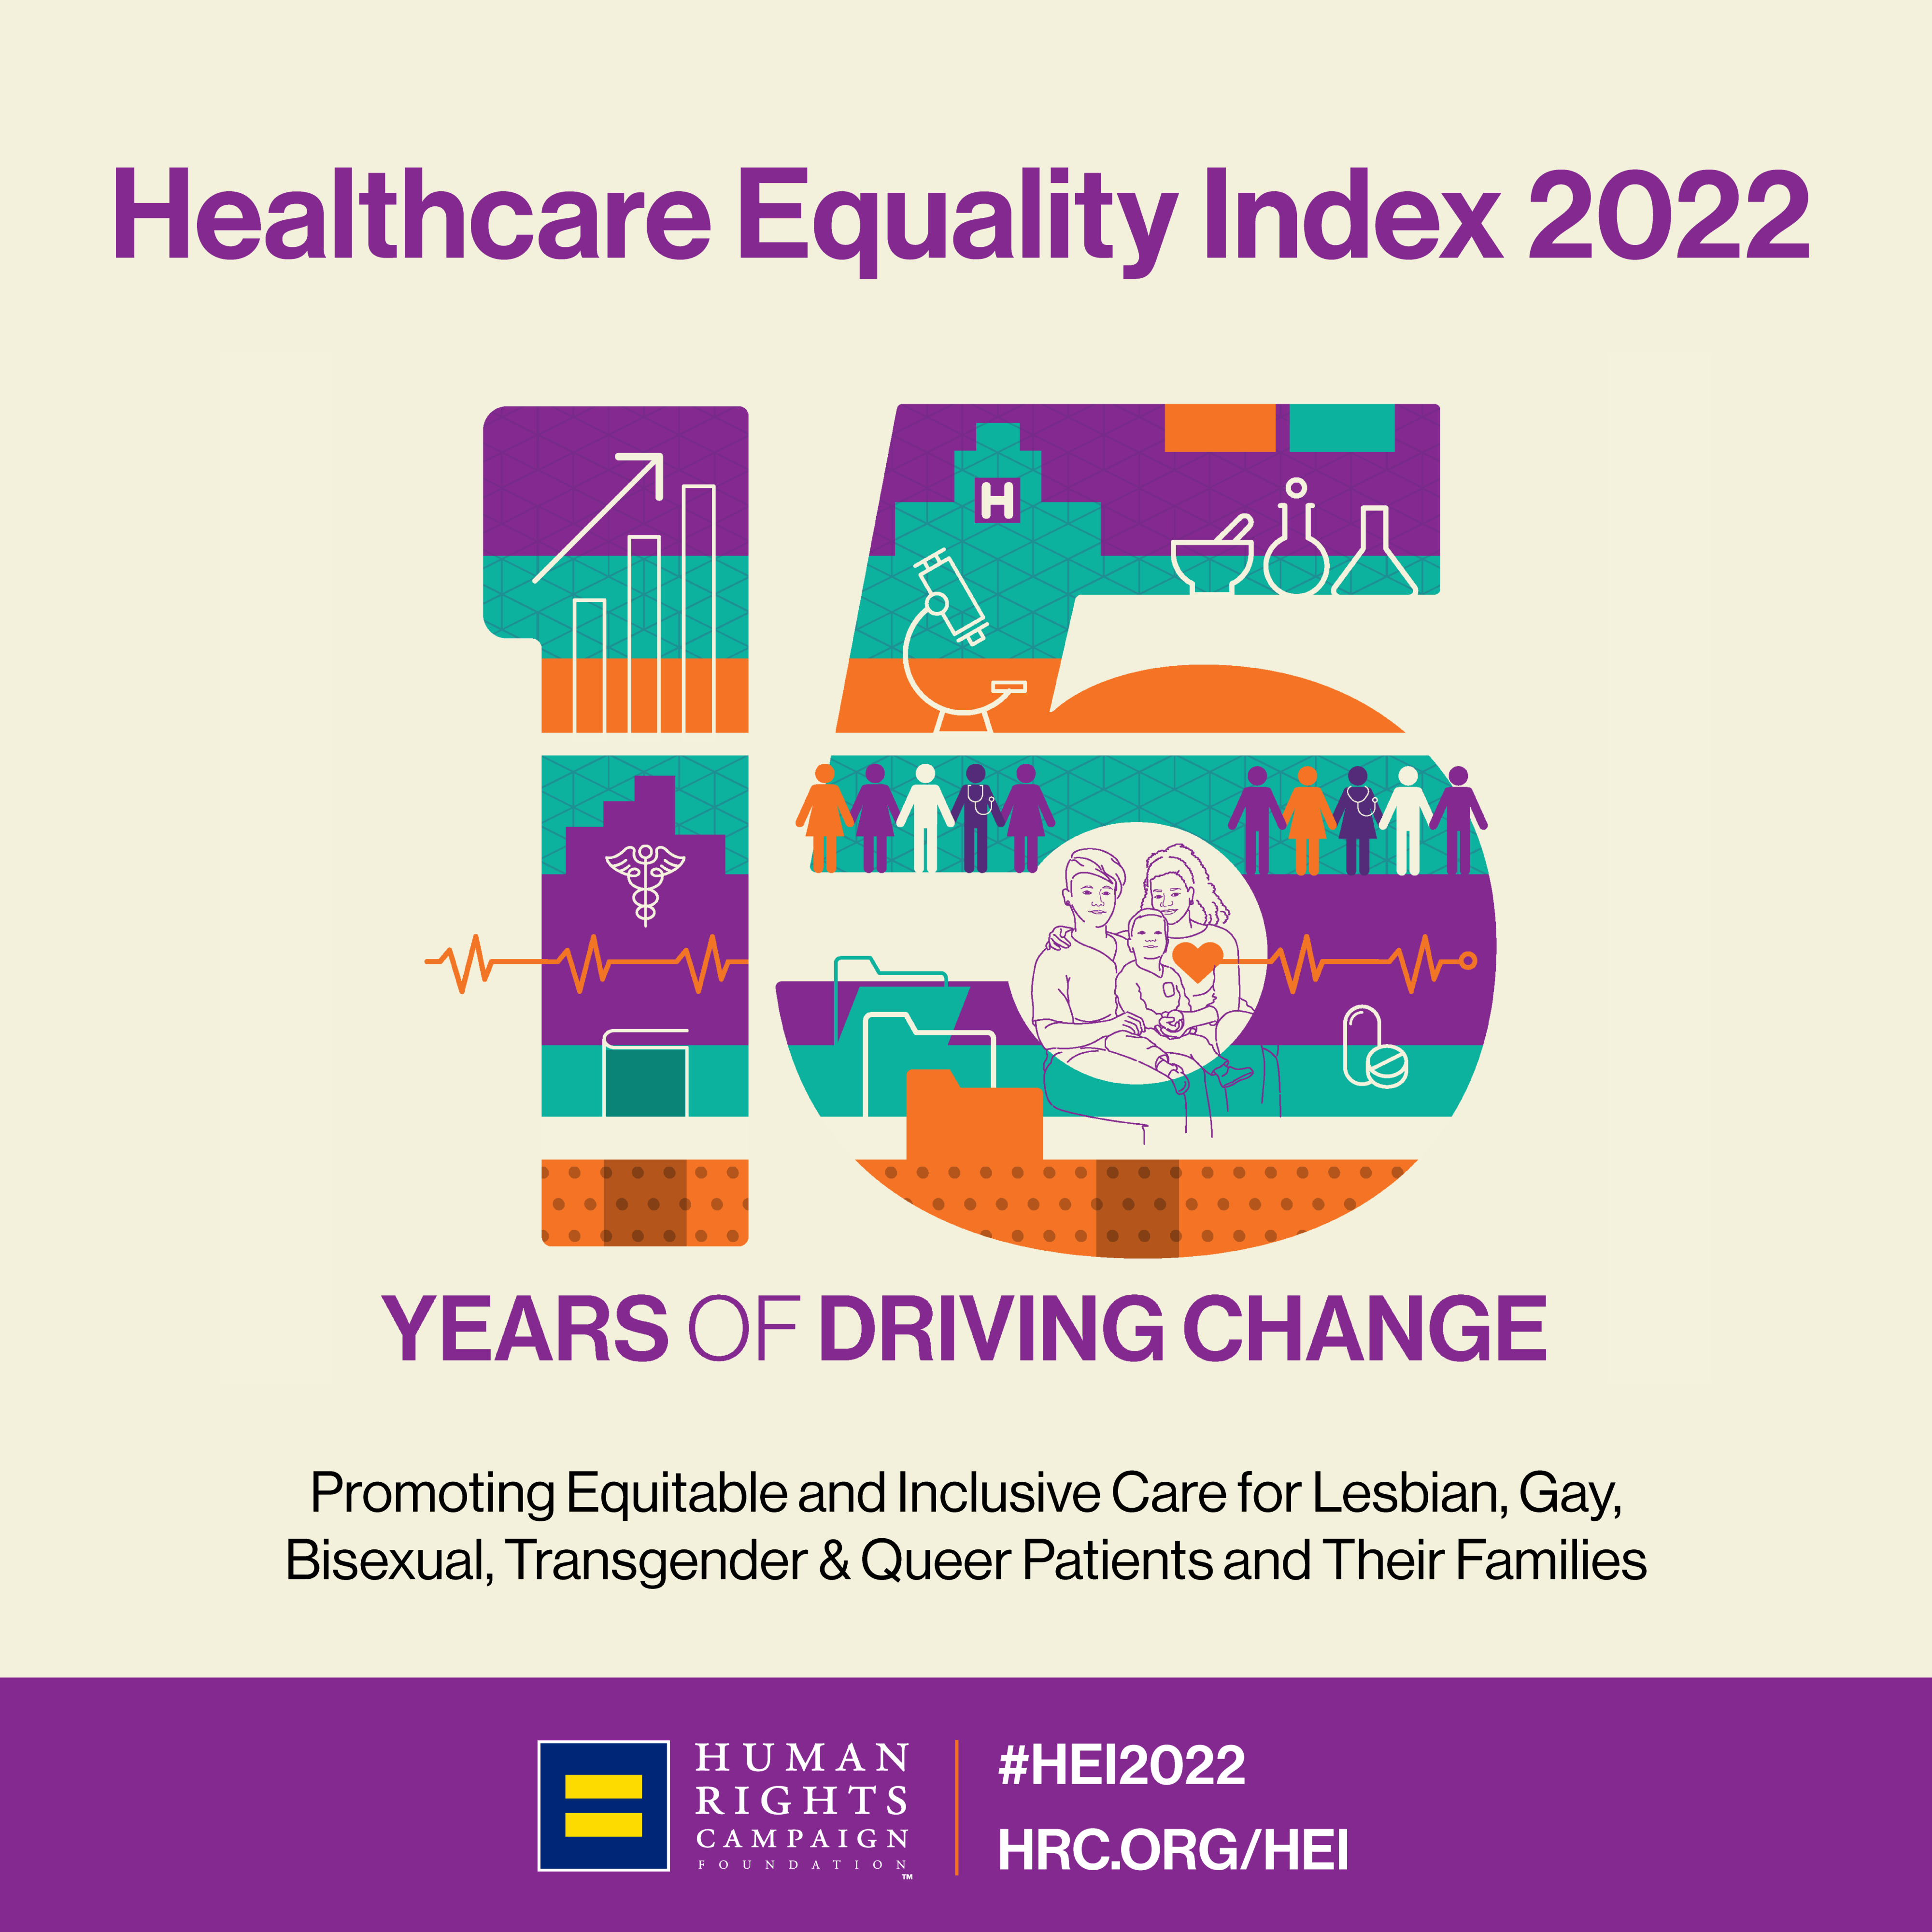 Healthcare Equality Index 2022